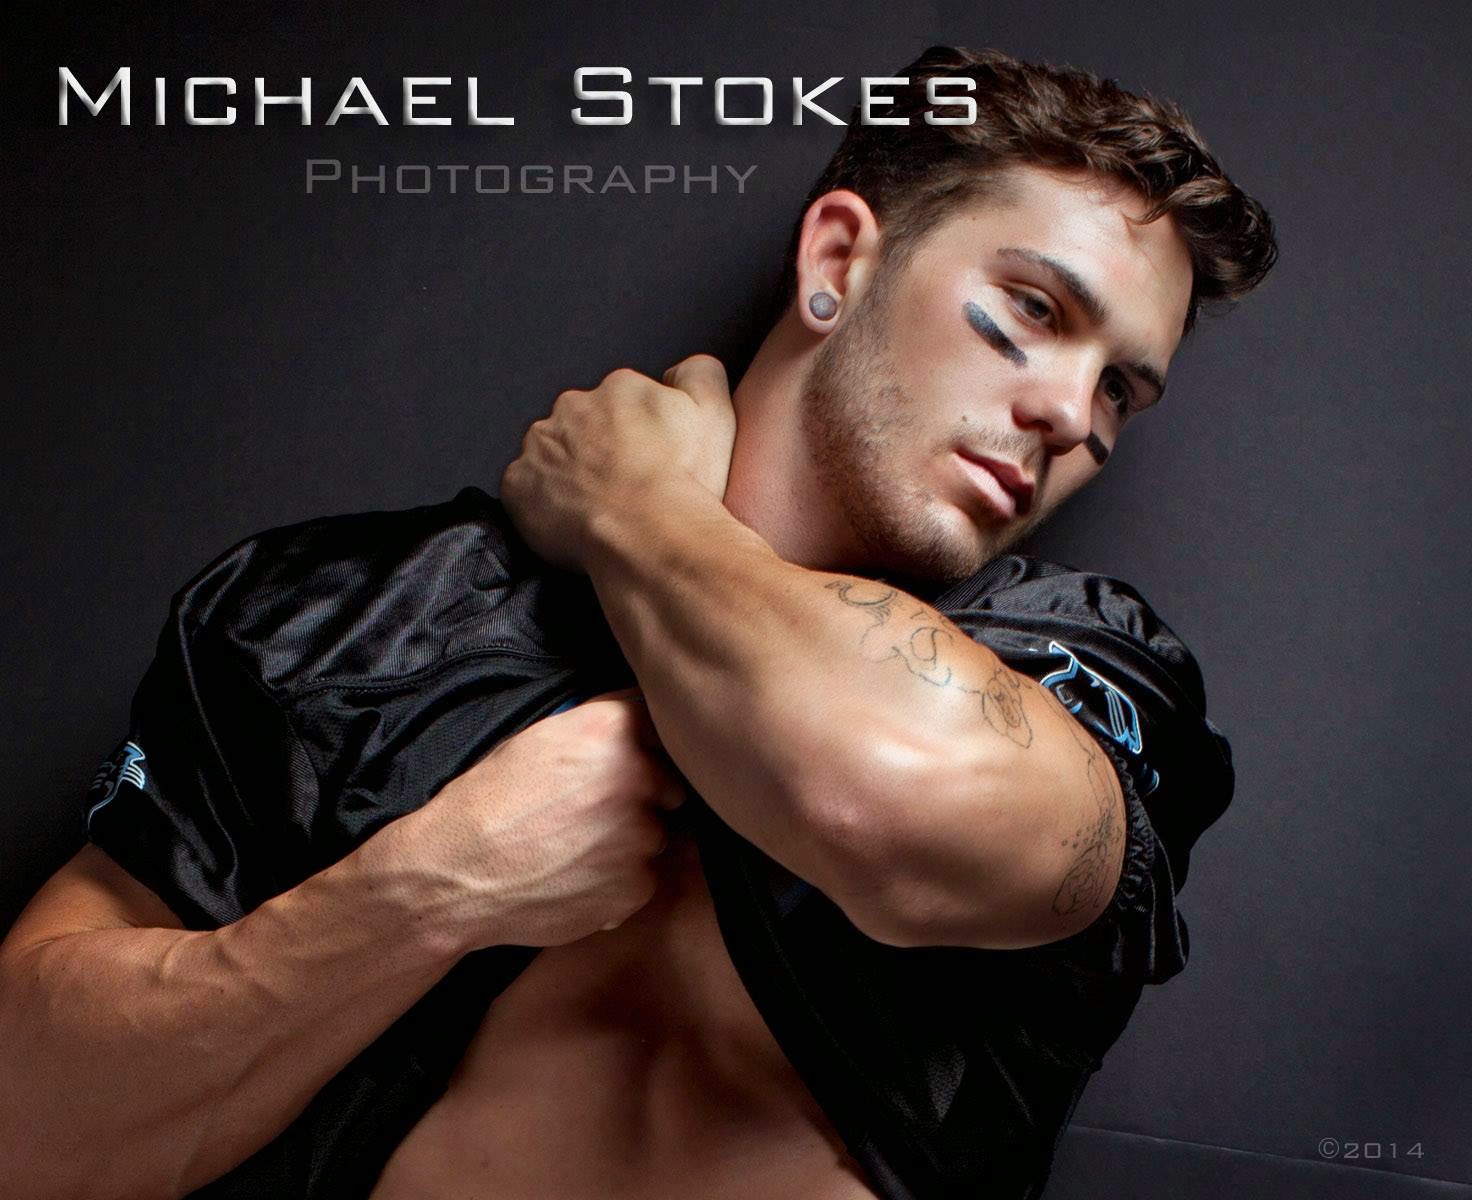 Michael stokes pictures